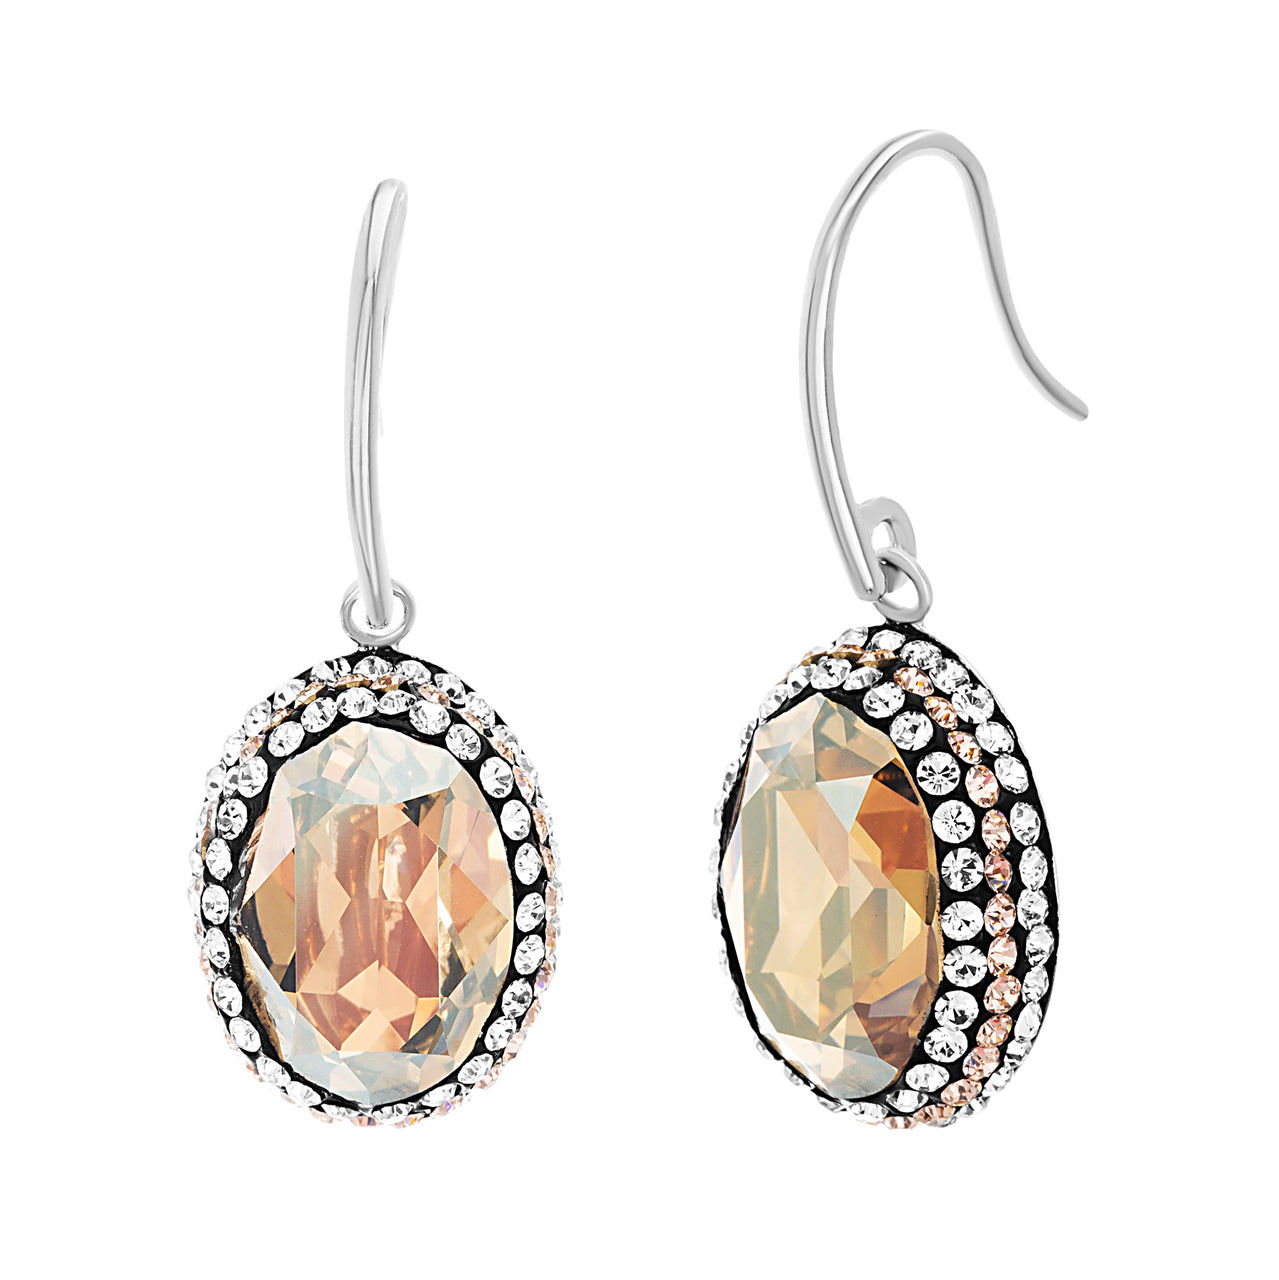  Oval Dangle Drop Earrings for Women on French Wire in 925 Sterling Silver made with Swarovski Crystals ( Champagne )